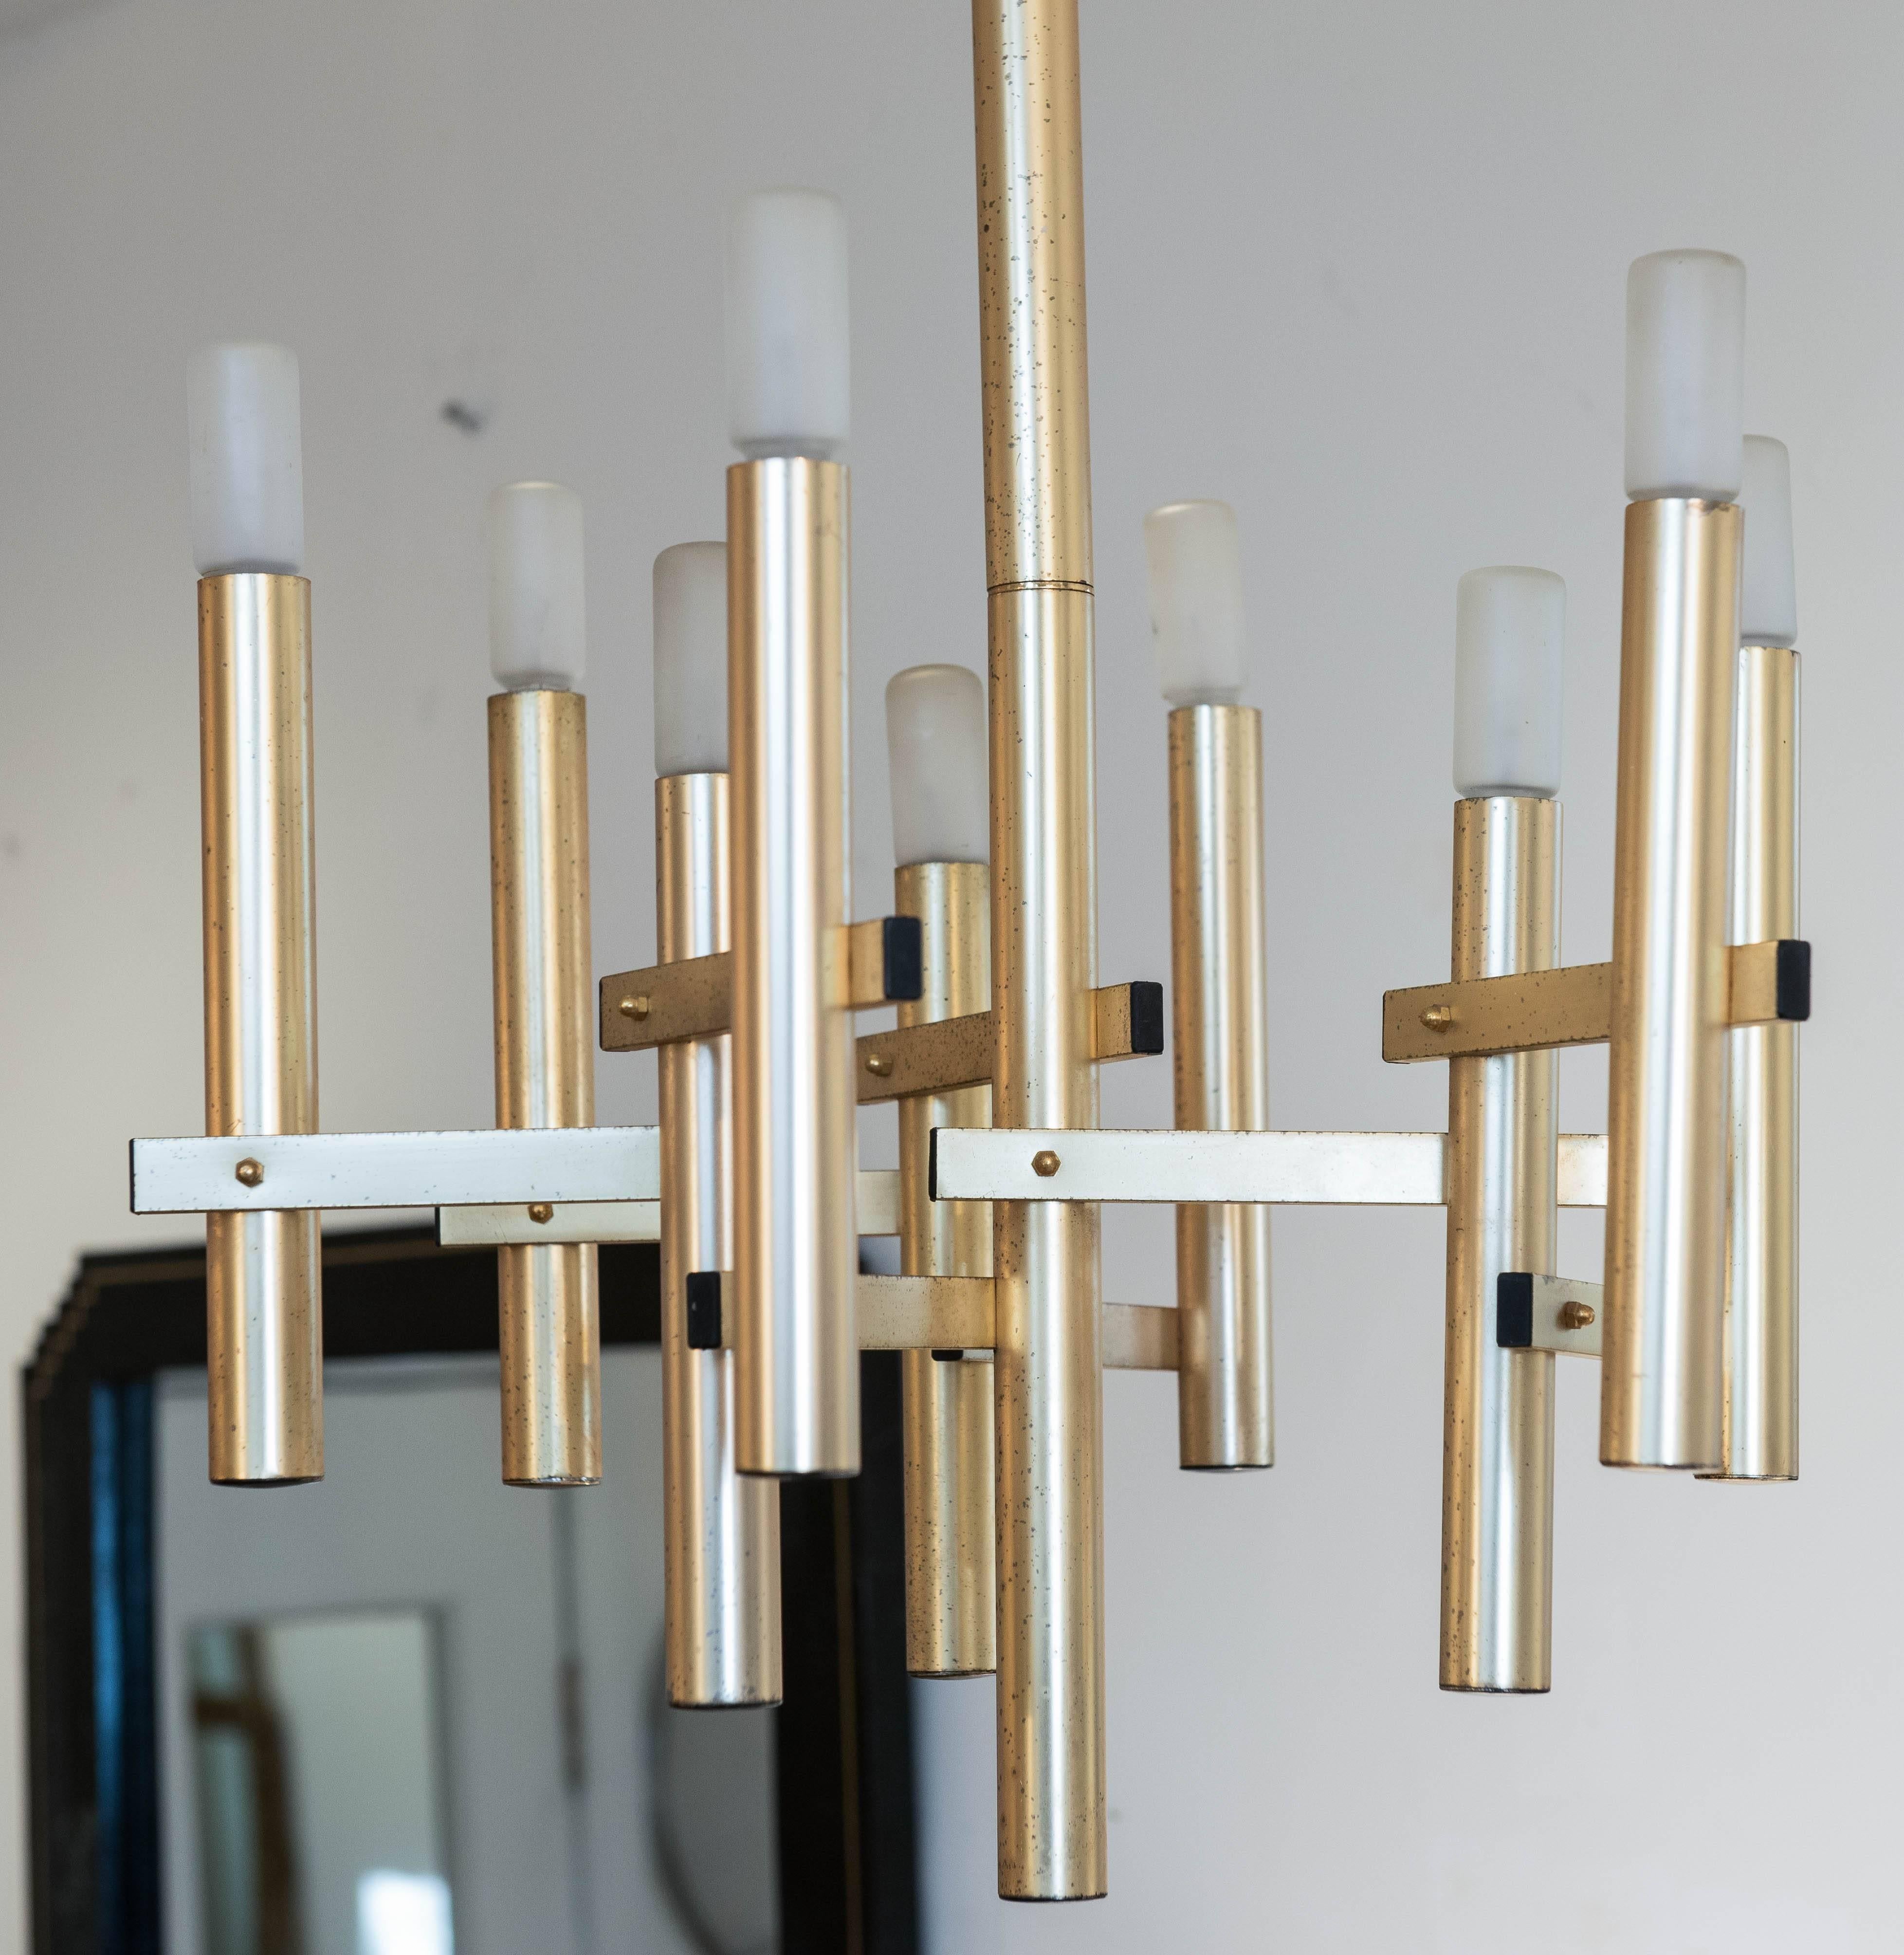 This appealing and simple Sciolari style nine light pendant is finished in 